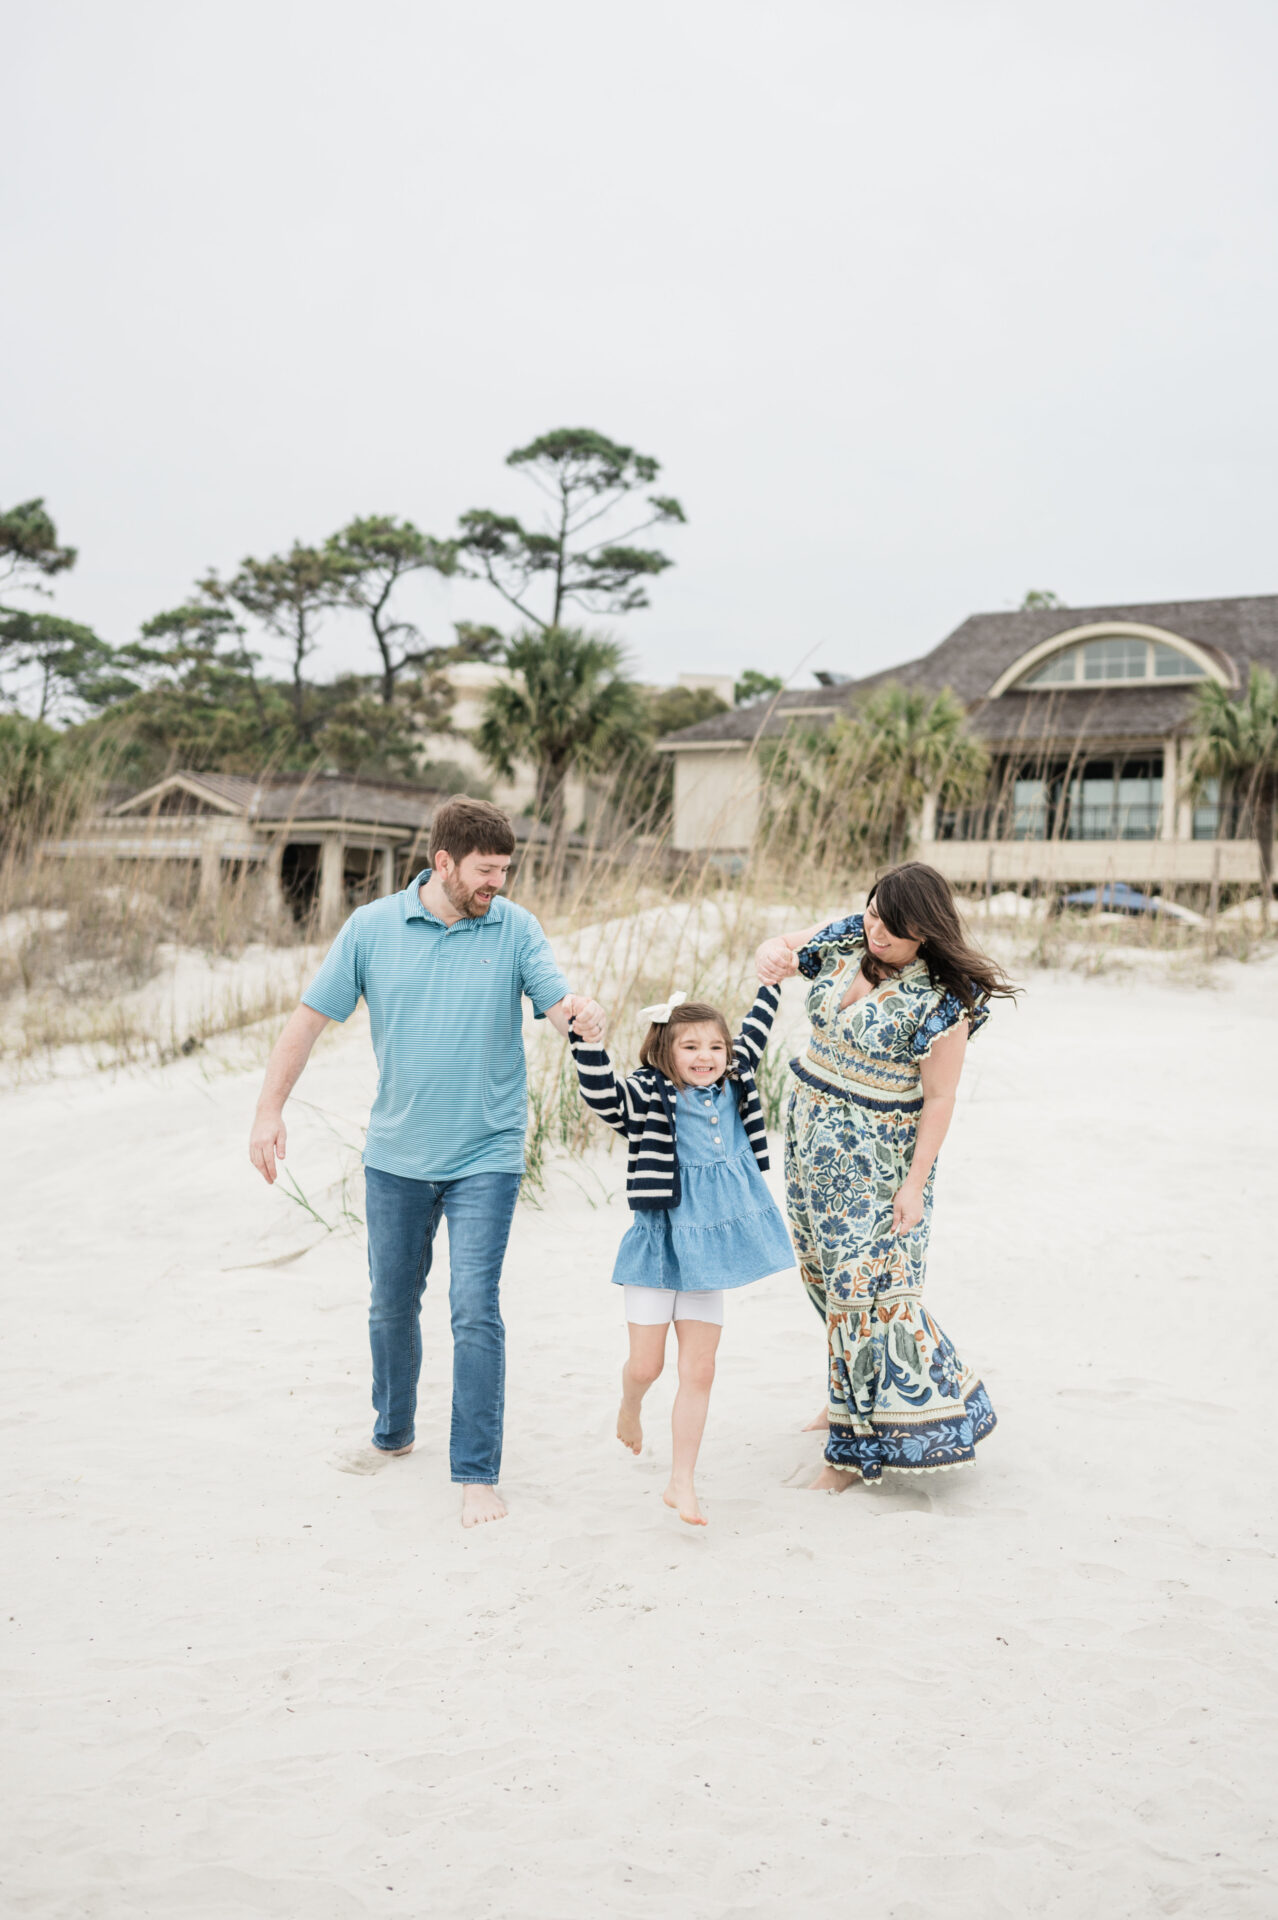 Naylor family holding hands and swinging daughter while on the beach in Hilton Head Island, South Carolina